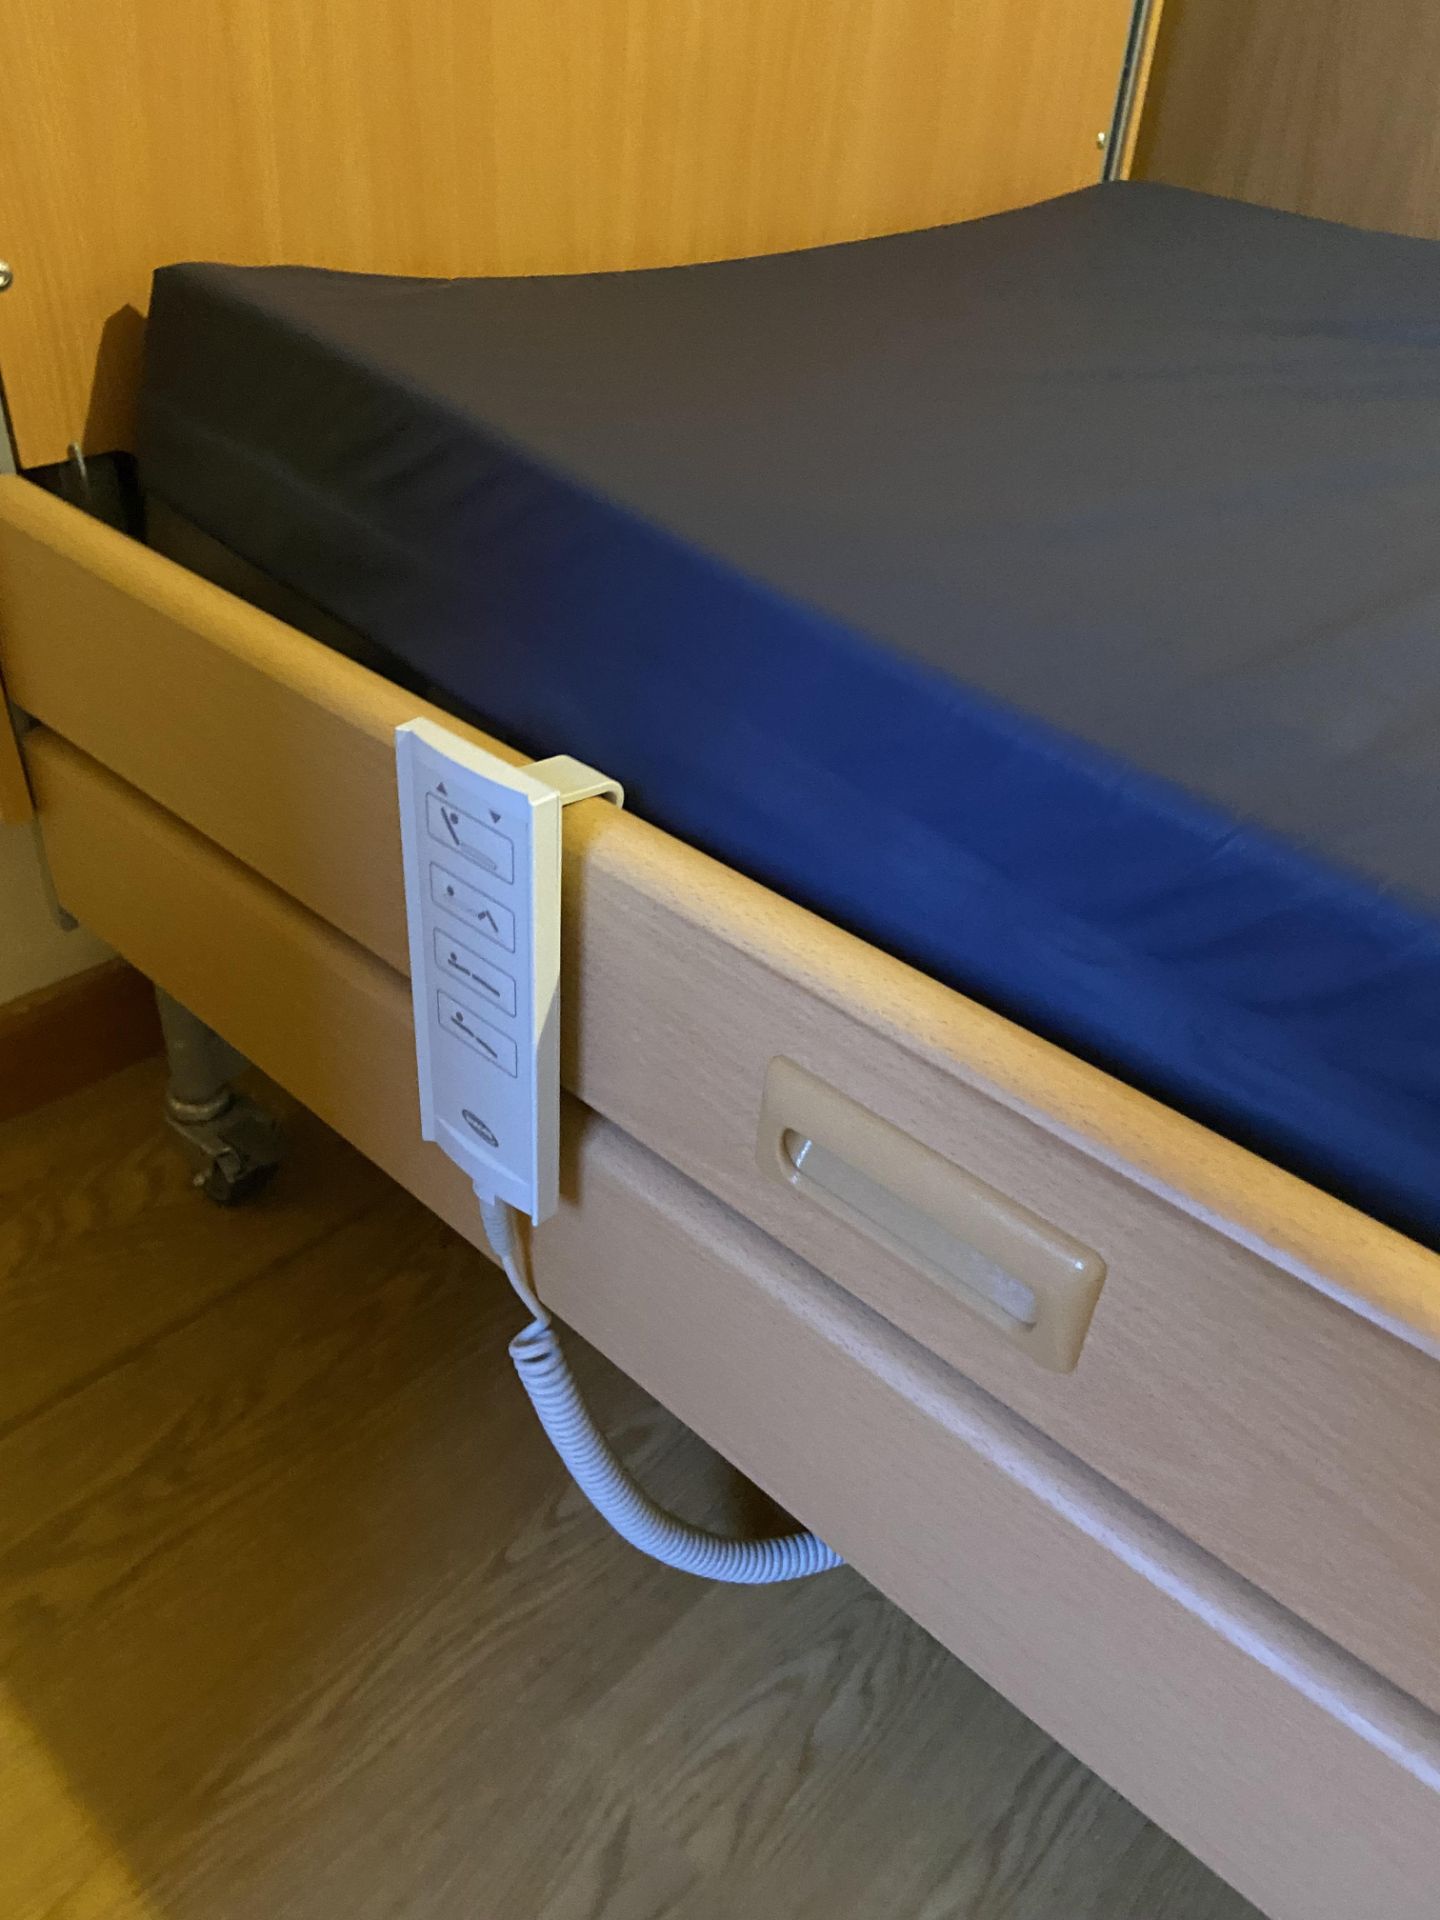 Invacare Mobile Adjustable Height Bed Frame, with Invacare soft foam premier mattress (Room 24) - Image 3 of 3